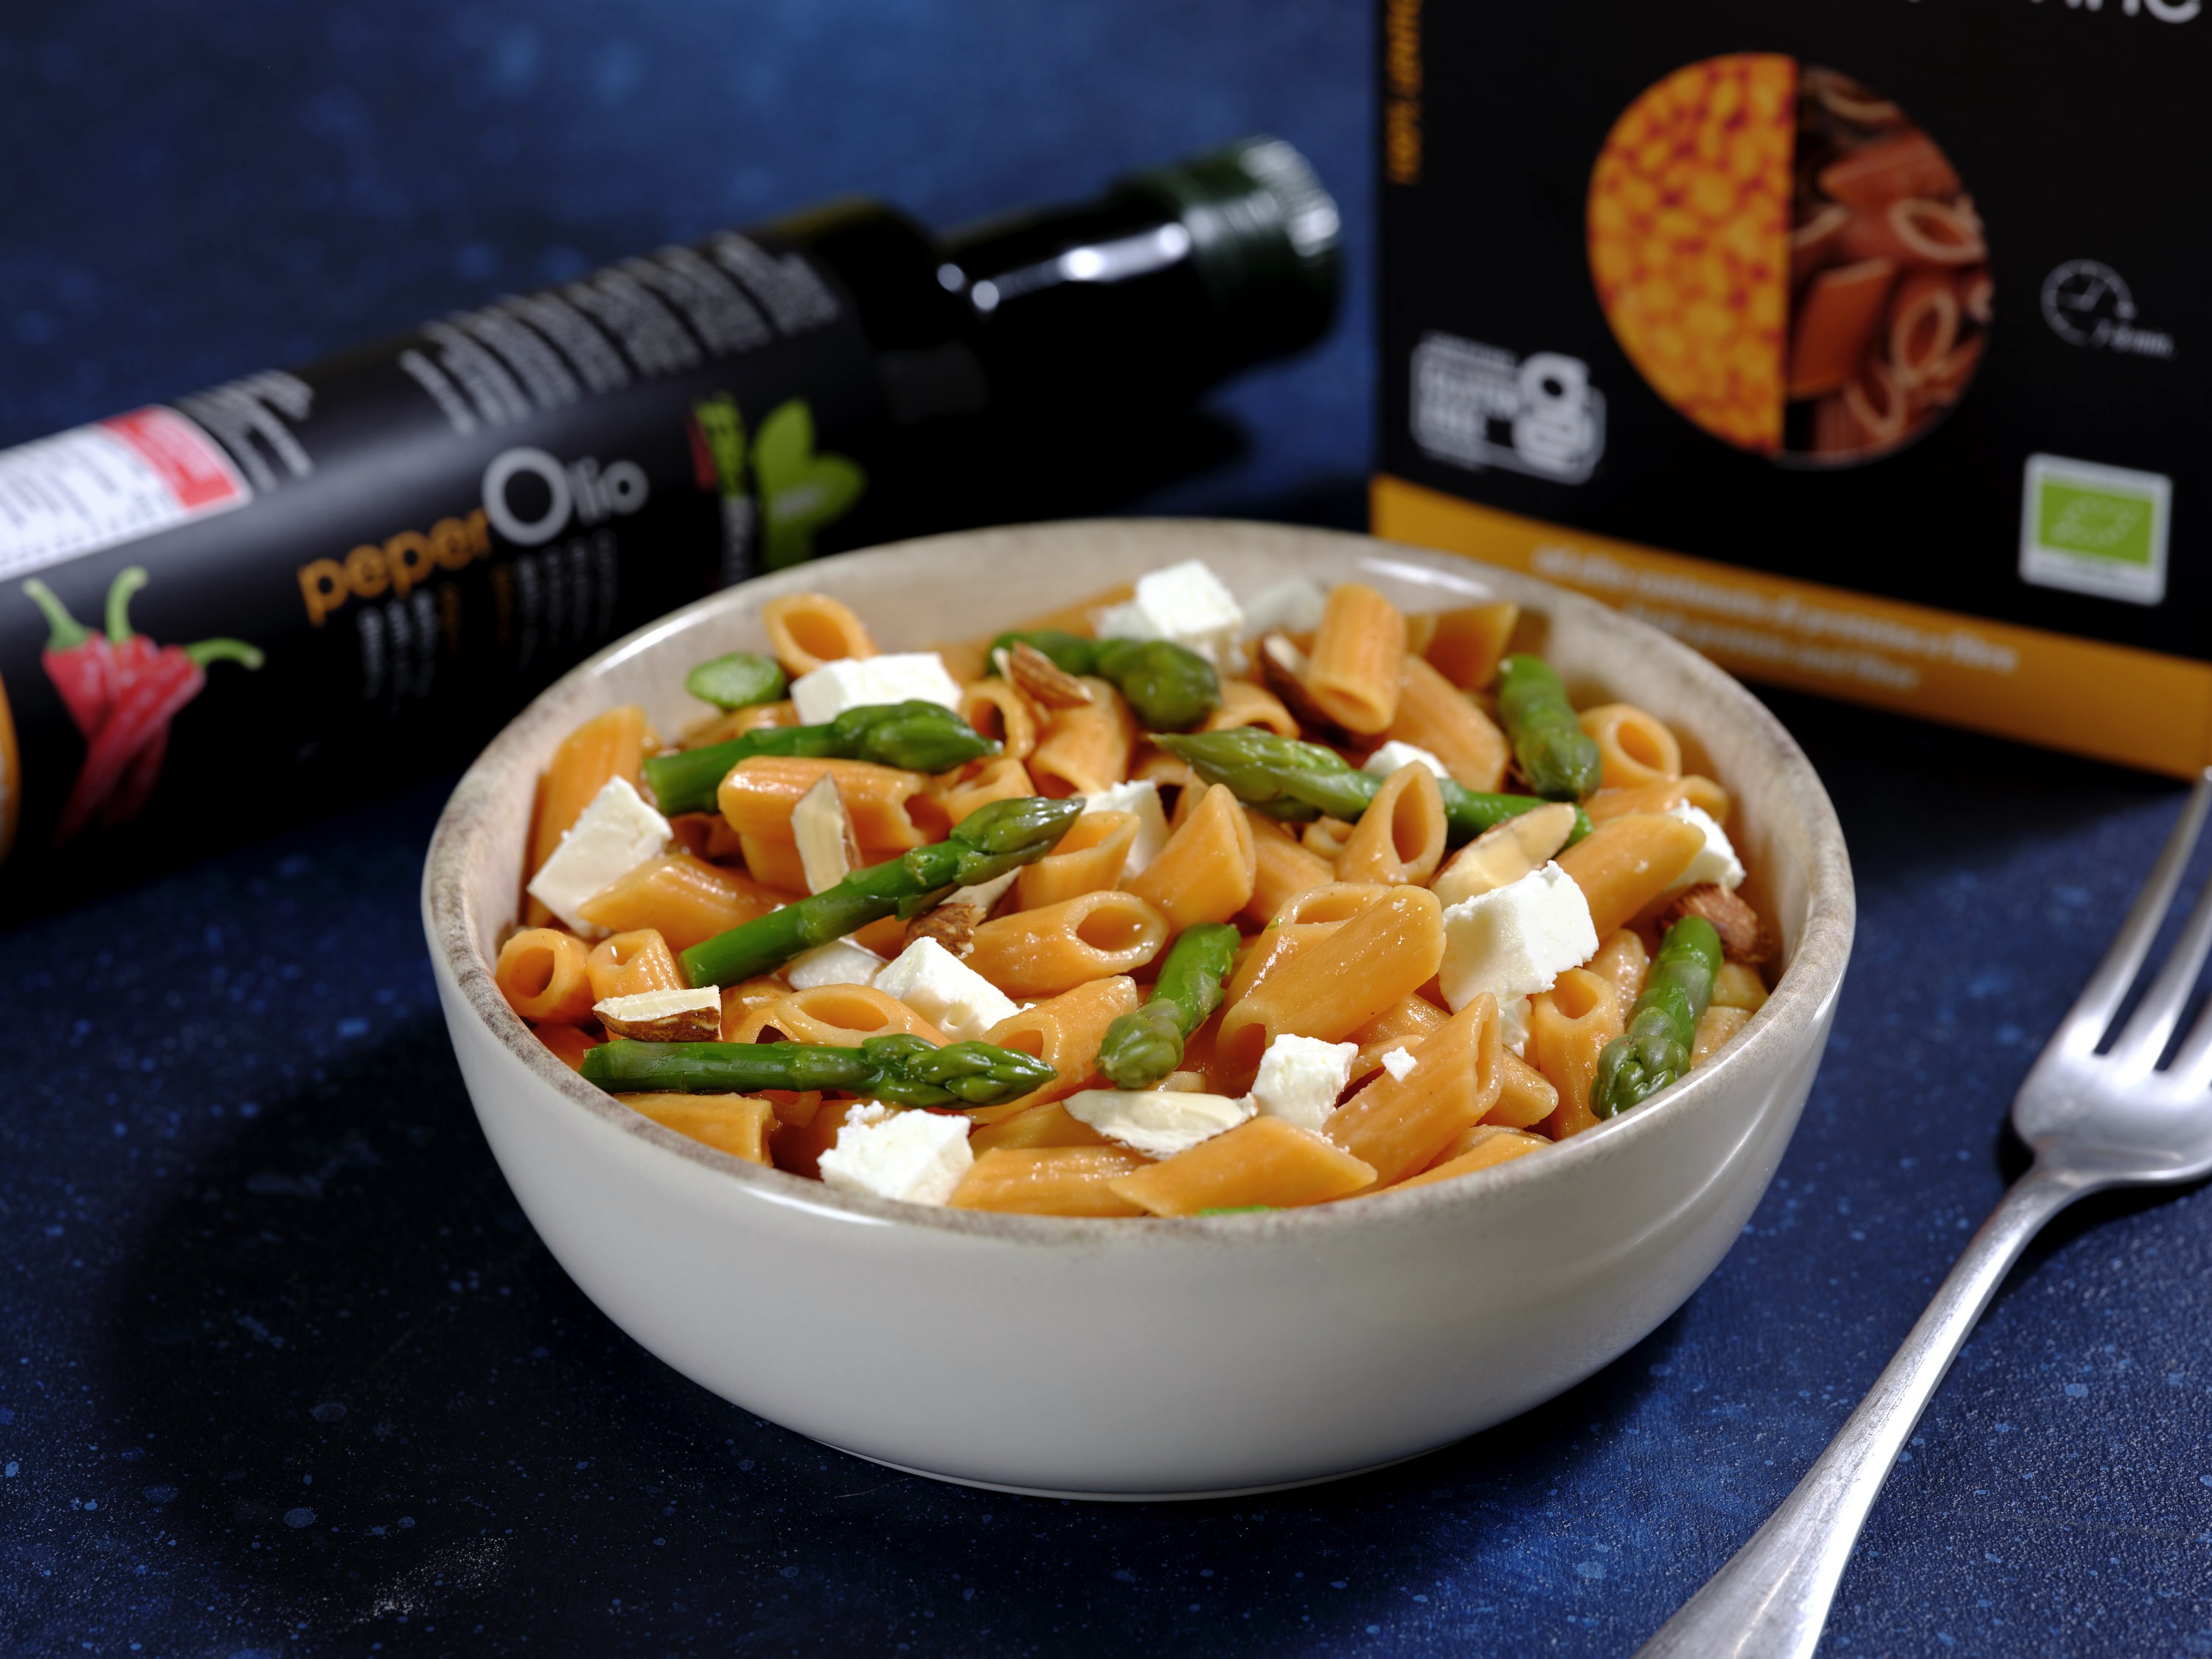 Lentil mezze penne with feta cheese, asparagus, almonds and Peperolio